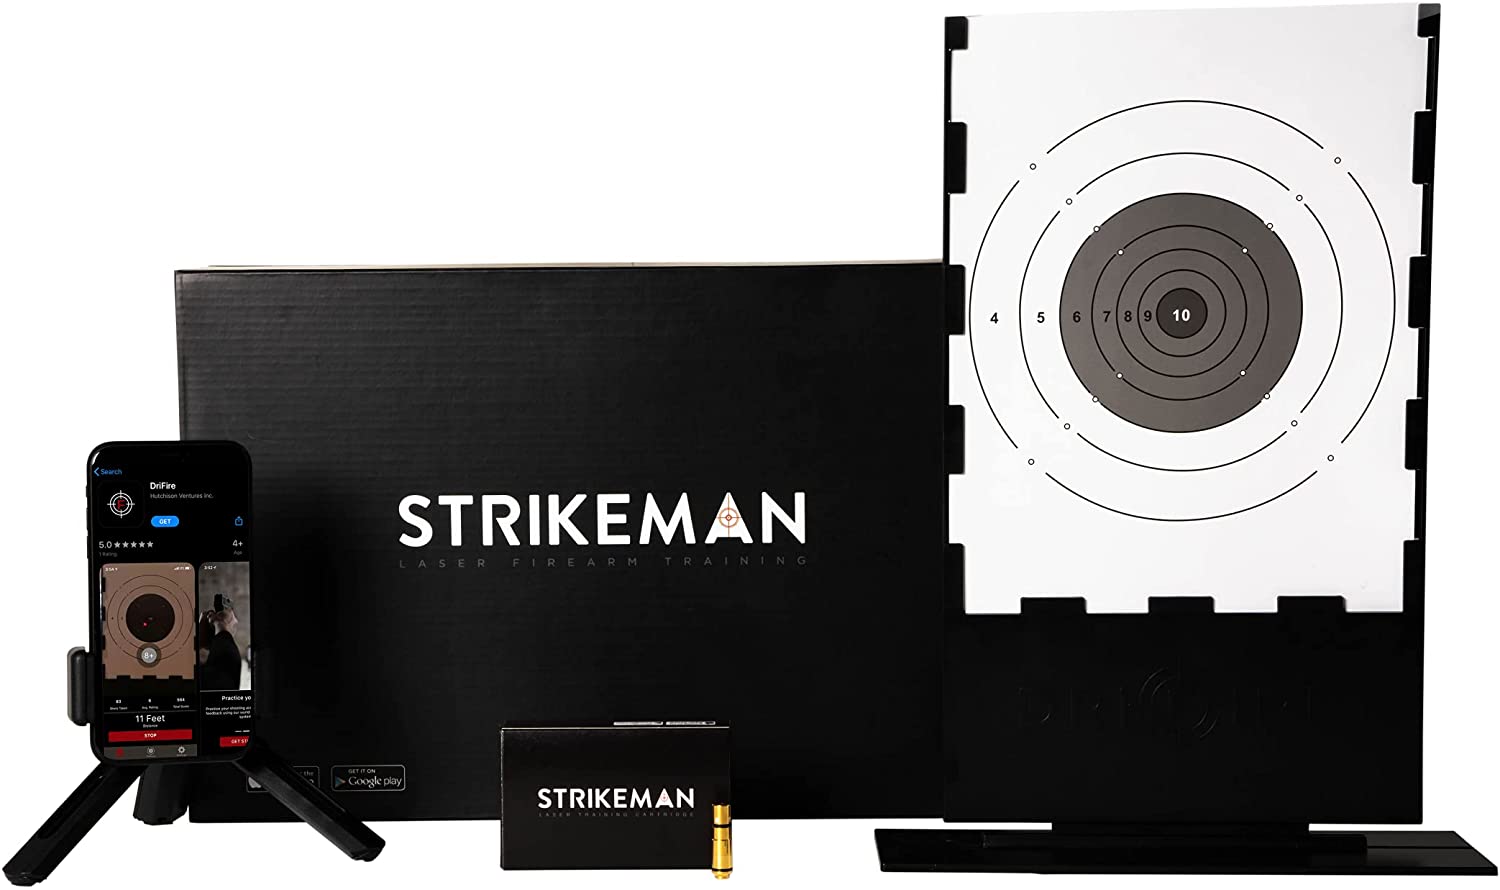 Strikeman - Dry Fire Training Kit with .308 Winchester Ammo Bullet & Downloadable App